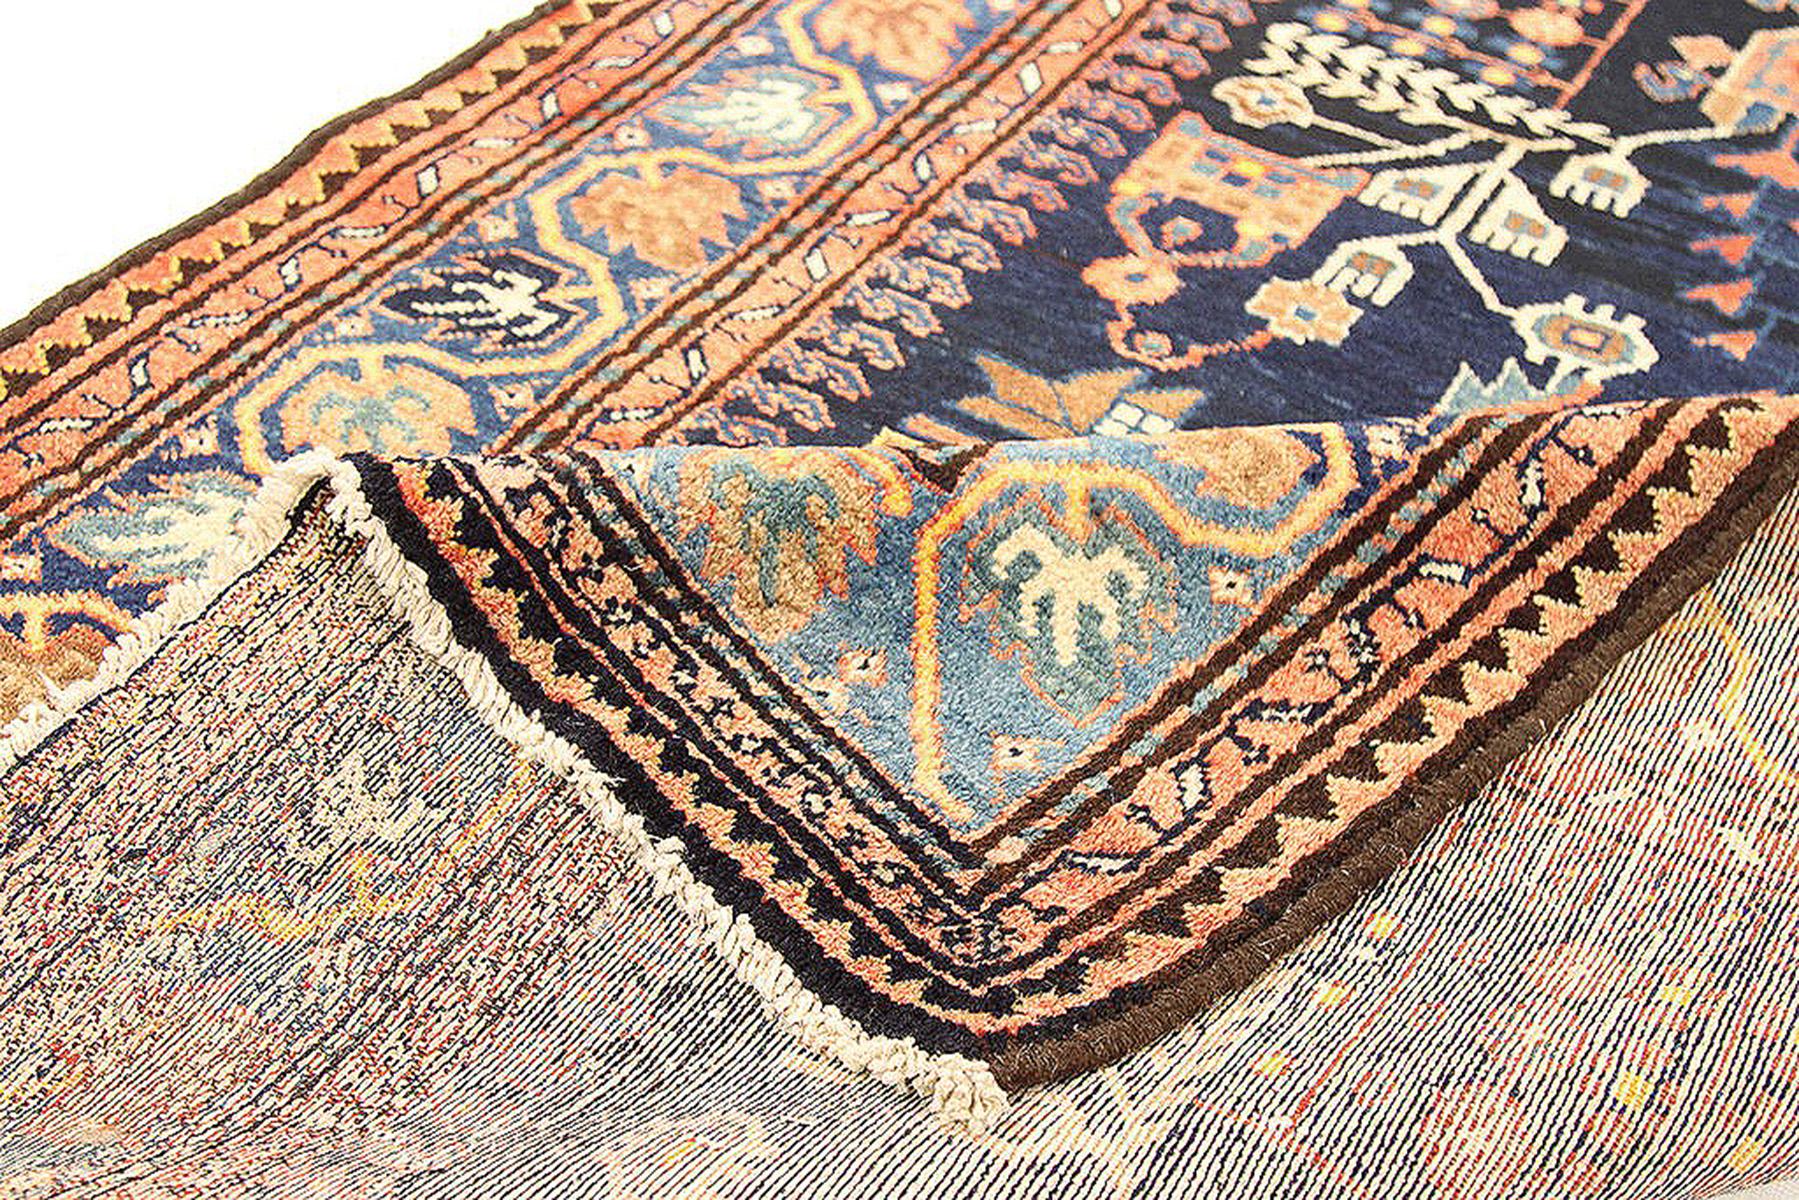 Antique Persian runner rug handwoven from the finest sheep’s wool and colored with all-natural vegetable dyes that are safe for humans and pets. It’s a traditional Malayer design featuring a mixed brown, blue, orange, and white combination of floral